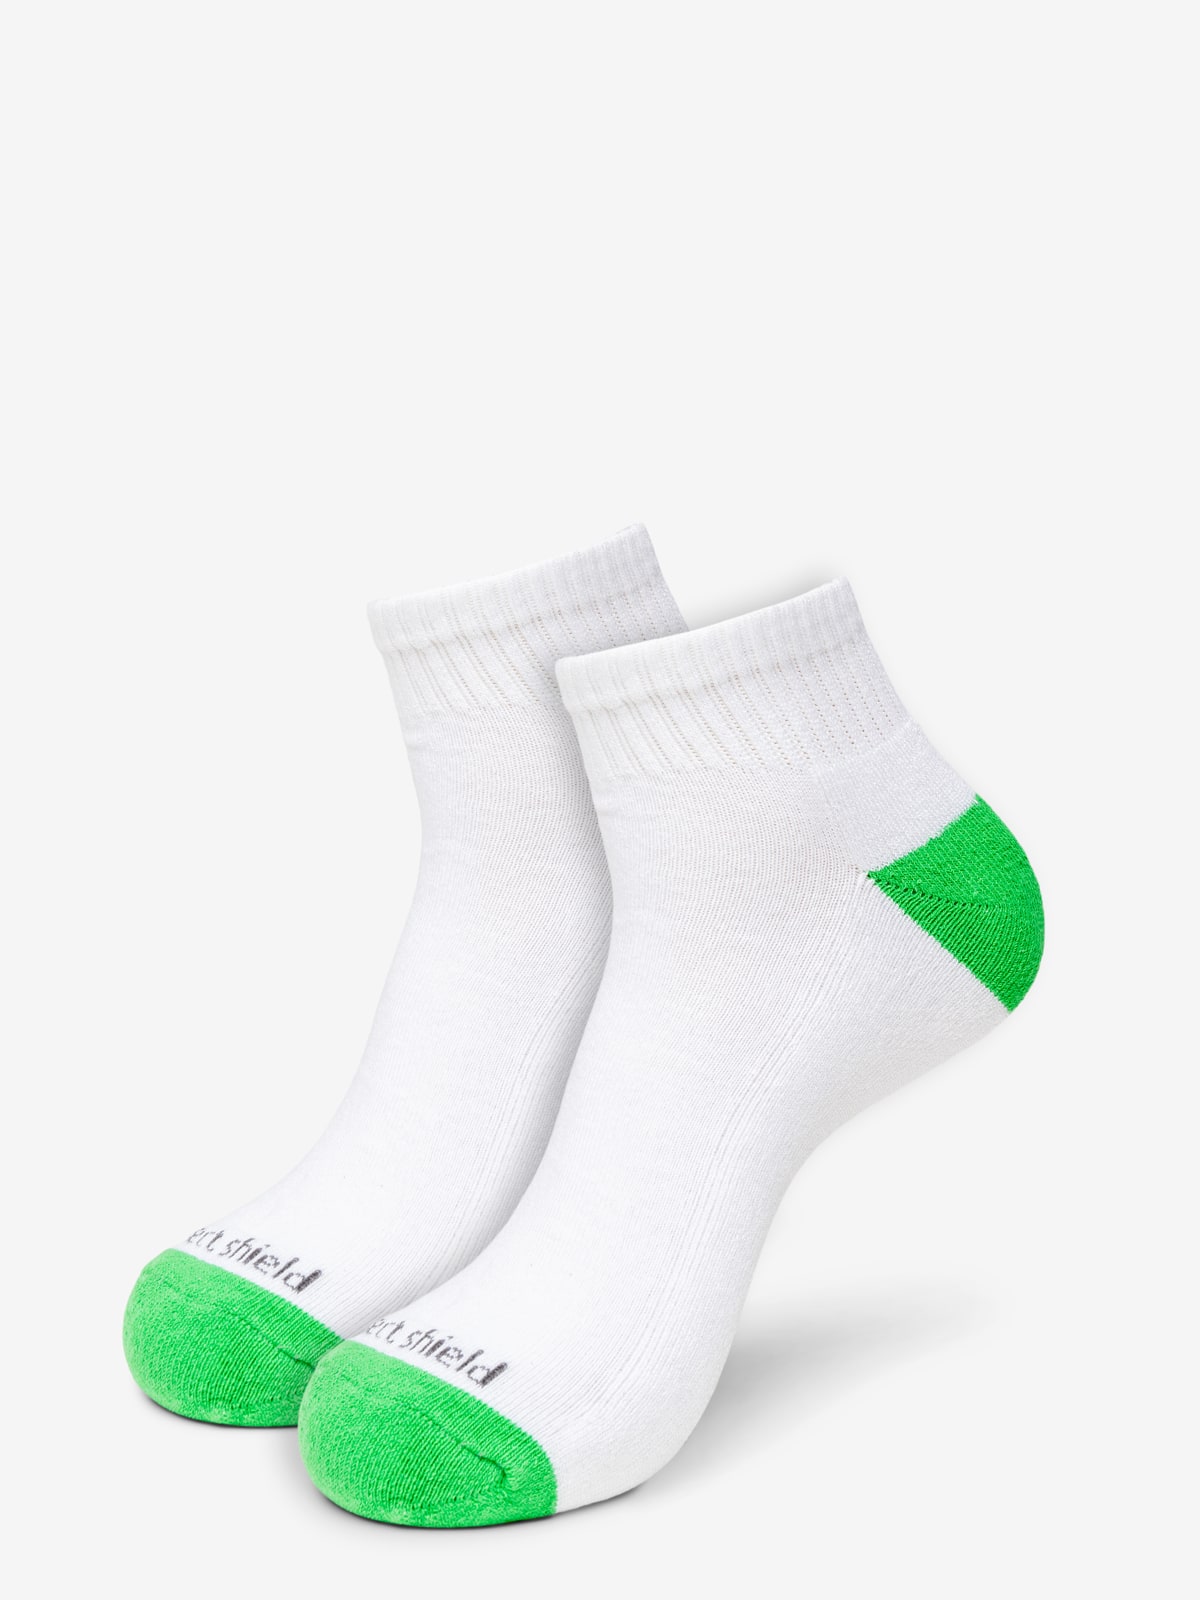 Insect Shield Golf & Sport Ankle Socks